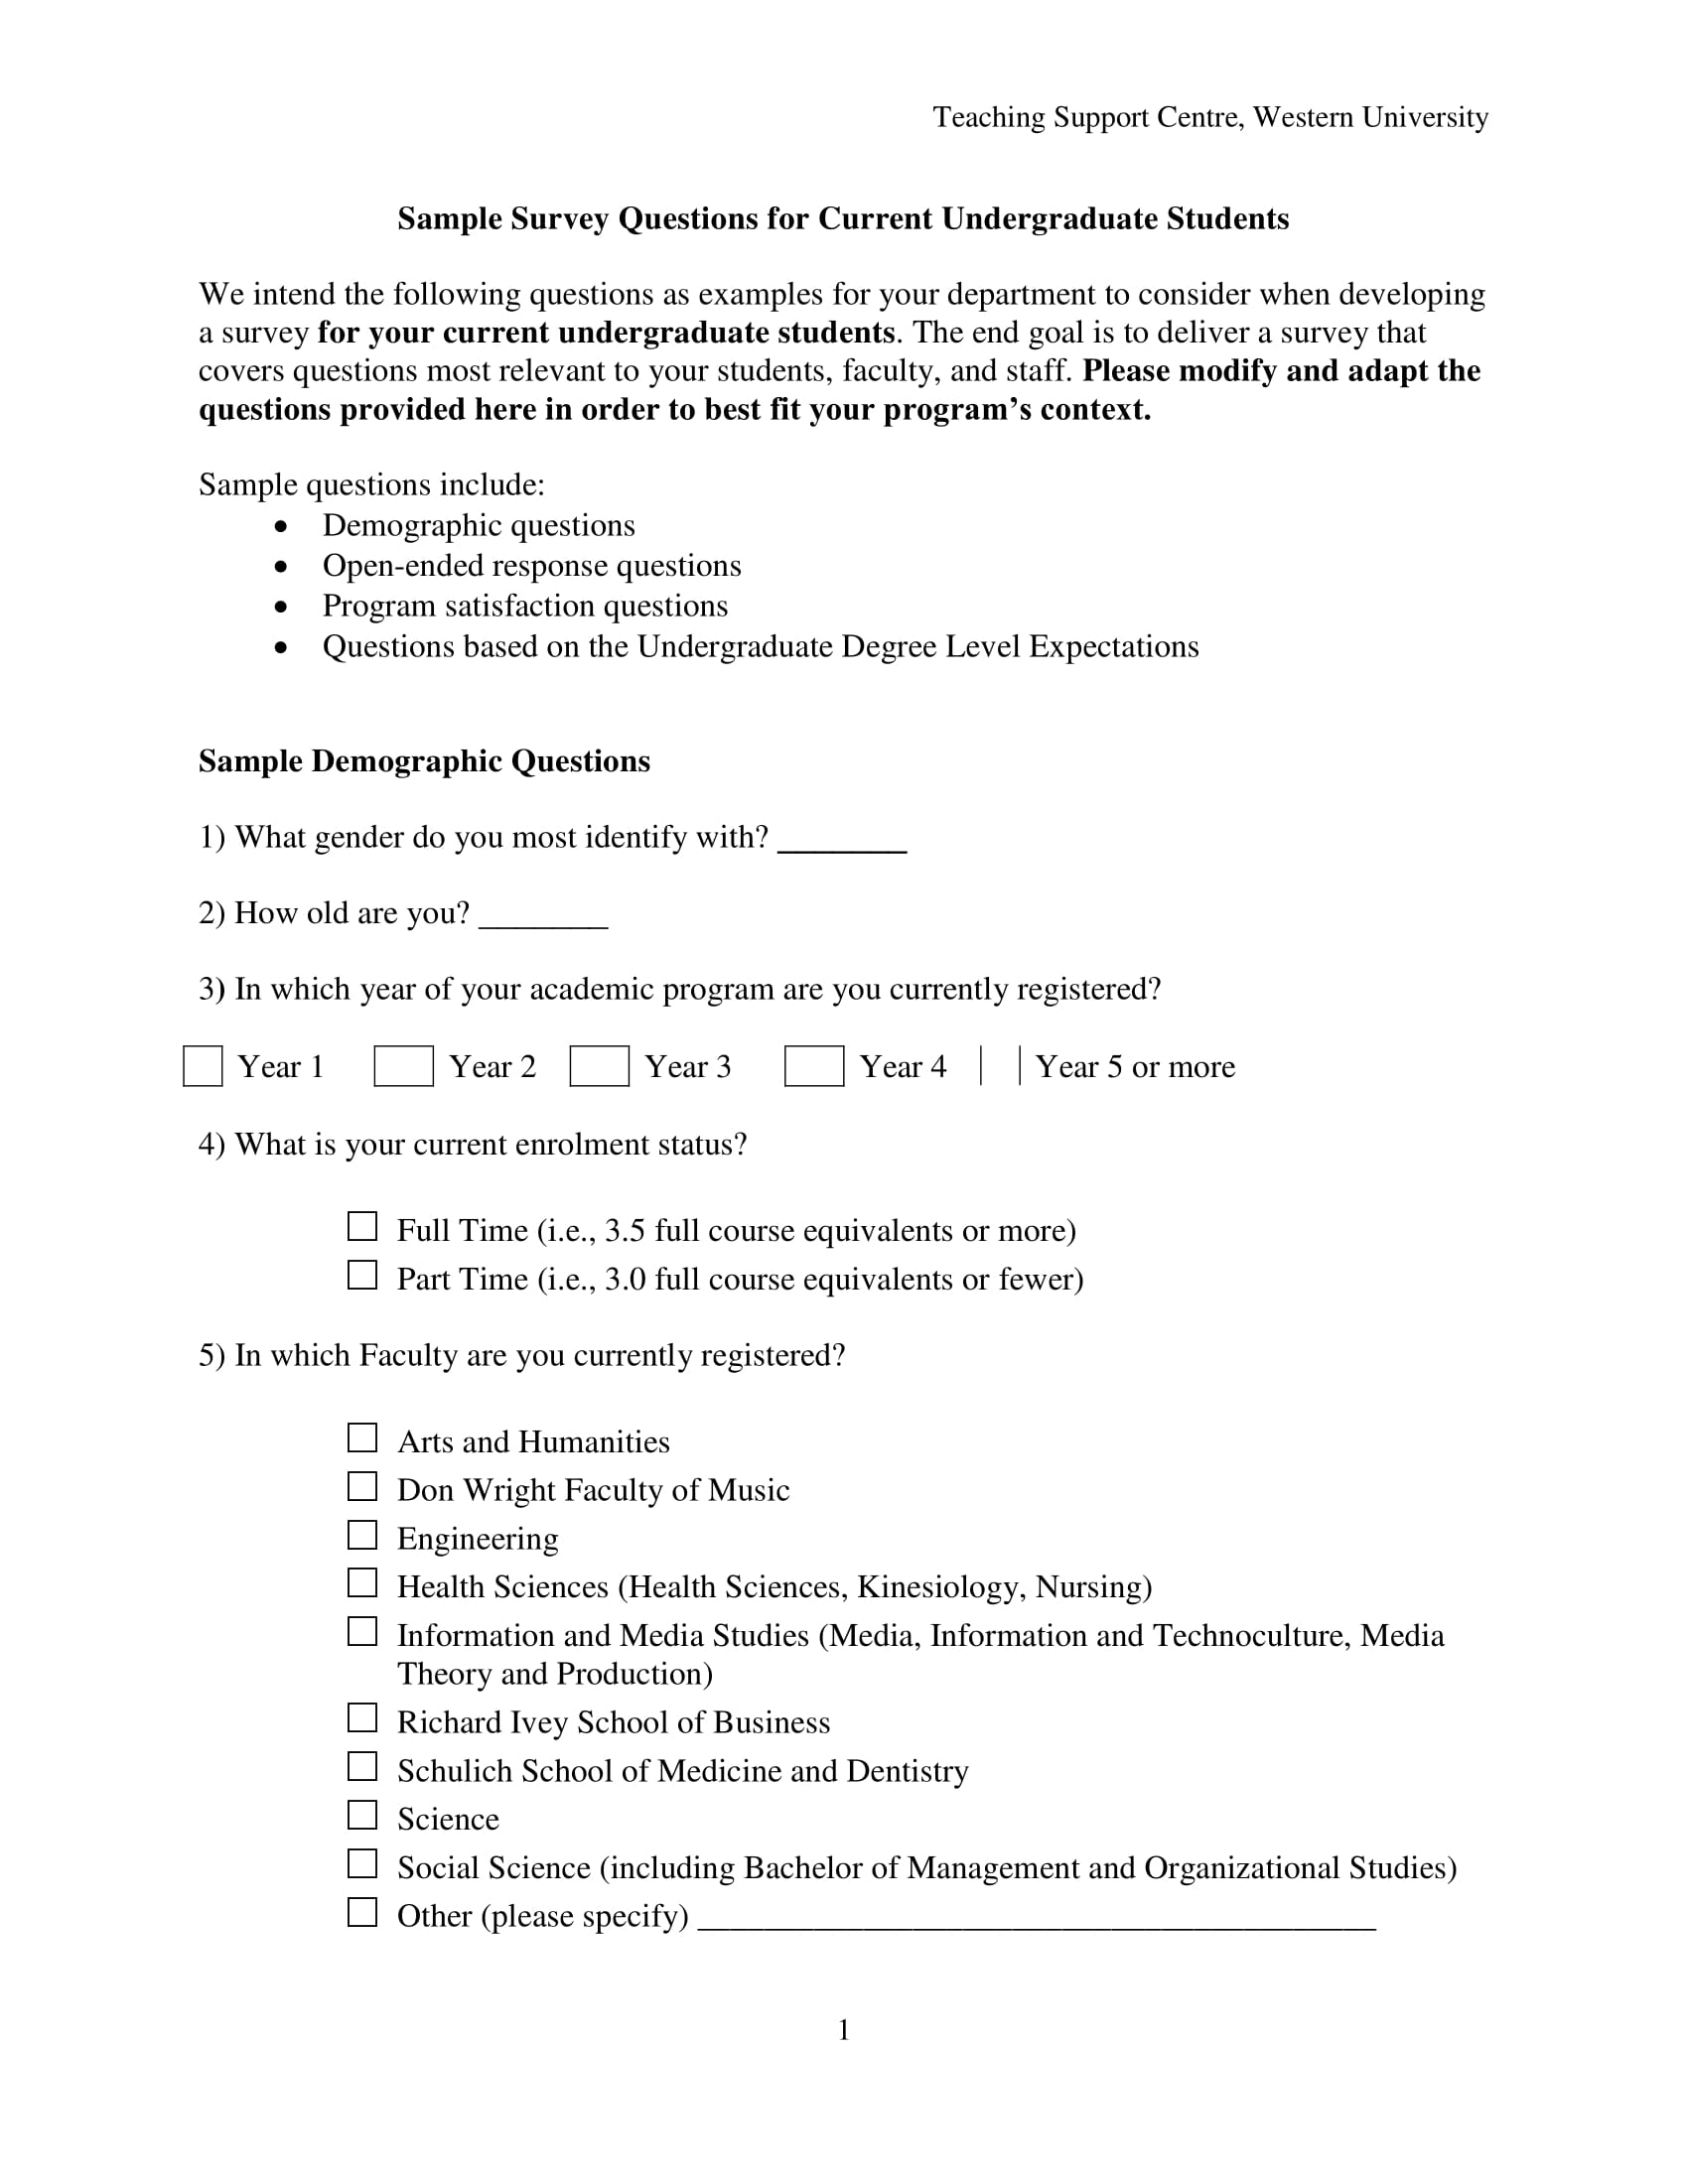 sample survey questions template for undergraduate students 1